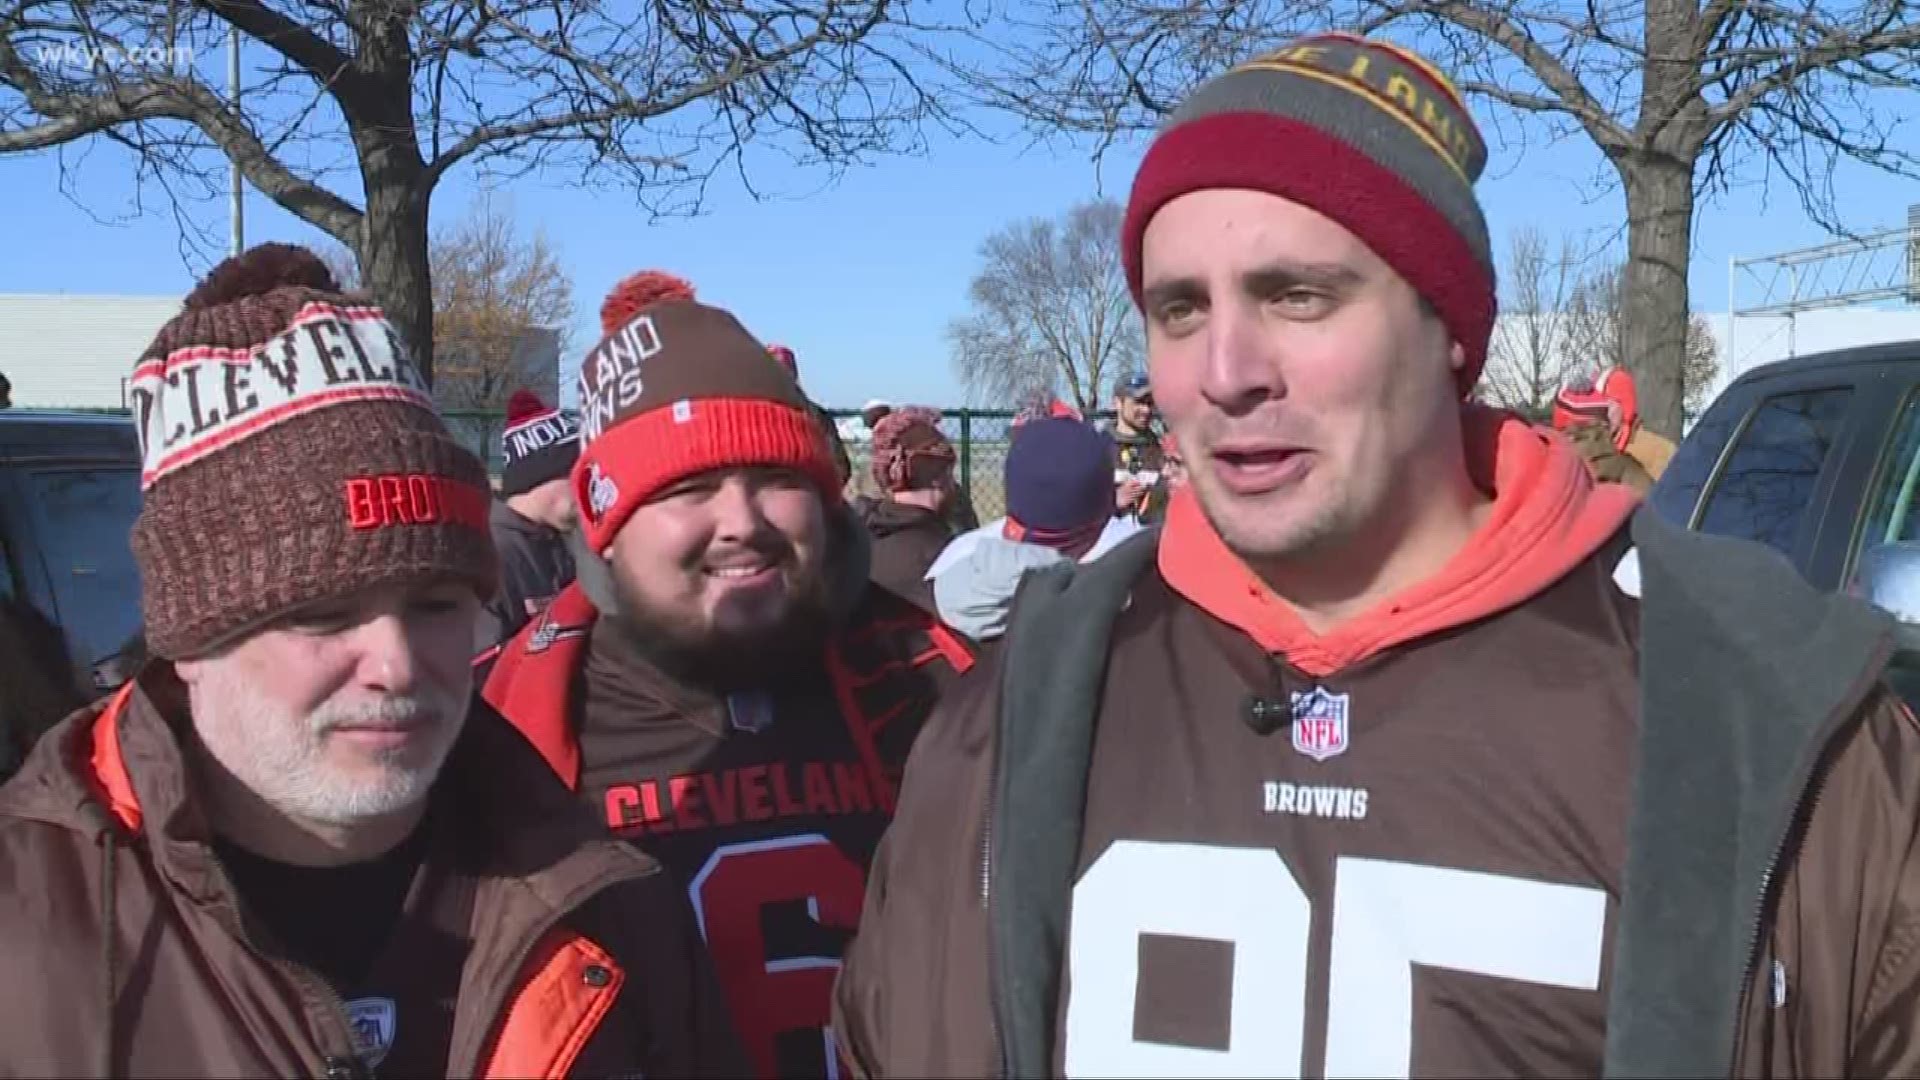 Browns fan from Cali gets chance to attend game thanks to crowd sourcing